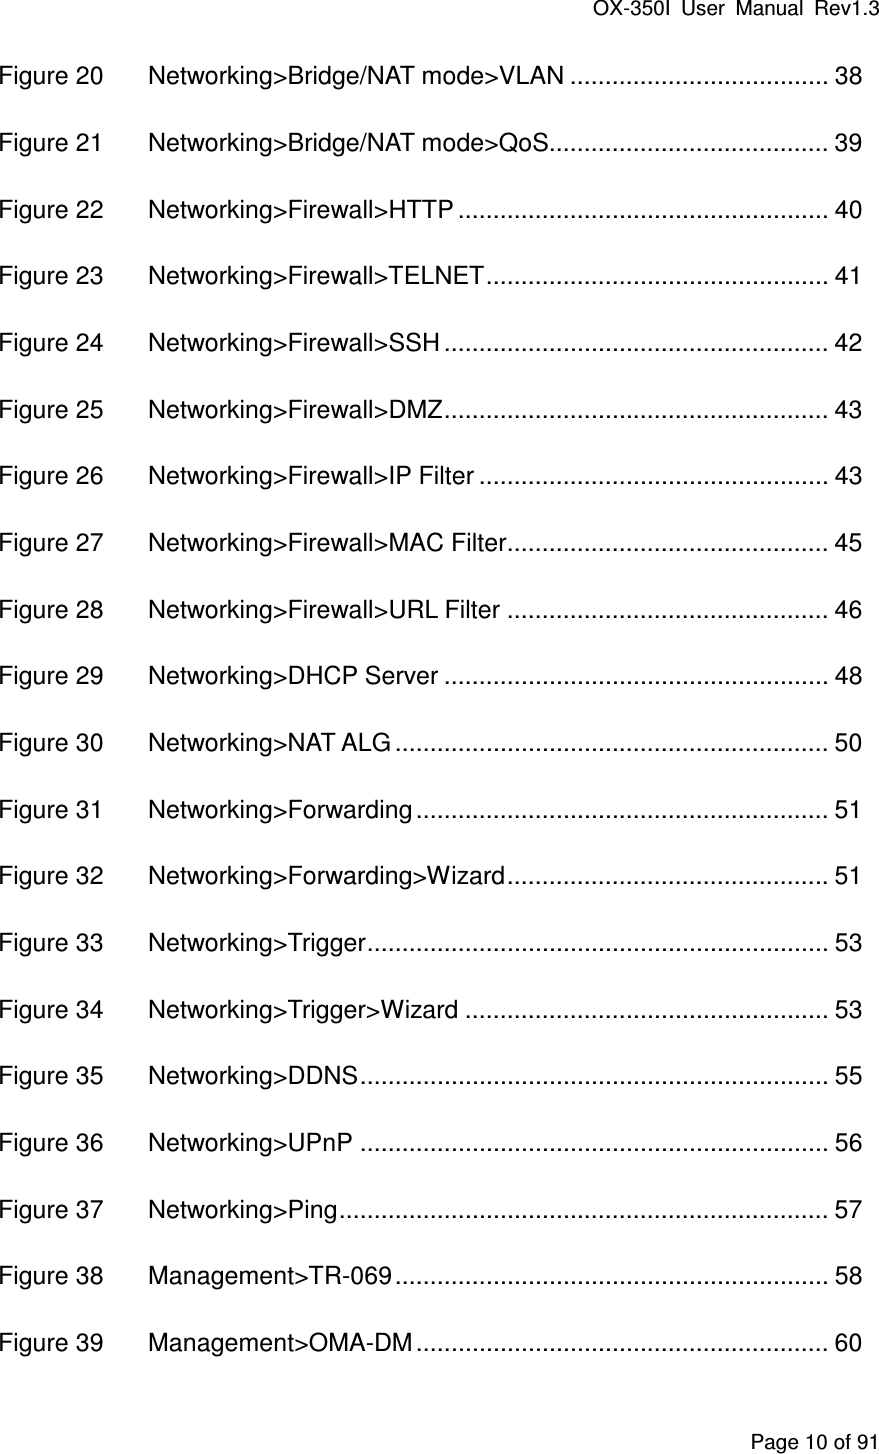 OX-350I  User  Manual  Rev1.3 Page 10 of 91 Figure 20 Networking&gt;Bridge/NAT mode&gt;VLAN ..................................... 38 Figure 21 Networking&gt;Bridge/NAT mode&gt;QoS........................................ 39 Figure 22 Networking&gt;Firewall&gt;HTTP ..................................................... 40 Figure 23 Networking&gt;Firewall&gt;TELNET ................................................. 41 Figure 24 Networking&gt;Firewall&gt;SSH ....................................................... 42 Figure 25 Networking&gt;Firewall&gt;DMZ ....................................................... 43 Figure 26 Networking&gt;Firewall&gt;IP Filter .................................................. 43 Figure 27 Networking&gt;Firewall&gt;MAC Filter .............................................. 45 Figure 28 Networking&gt;Firewall&gt;URL Filter .............................................. 46 Figure 29 Networking&gt;DHCP Server ....................................................... 48 Figure 30 Networking&gt;NAT ALG .............................................................. 50 Figure 31 Networking&gt;Forwarding ........................................................... 51 Figure 32 Networking&gt;Forwarding&gt;Wizard .............................................. 51 Figure 33 Networking&gt;Trigger .................................................................. 53 Figure 34 Networking&gt;Trigger&gt;Wizard .................................................... 53 Figure 35 Networking&gt;DDNS ................................................................... 55 Figure 36 Networking&gt;UPnP ................................................................... 56 Figure 37 Networking&gt;Ping ...................................................................... 57 Figure 38 Management&gt;TR-069 .............................................................. 58 Figure 39 Management&gt;OMA-DM ........................................................... 60 